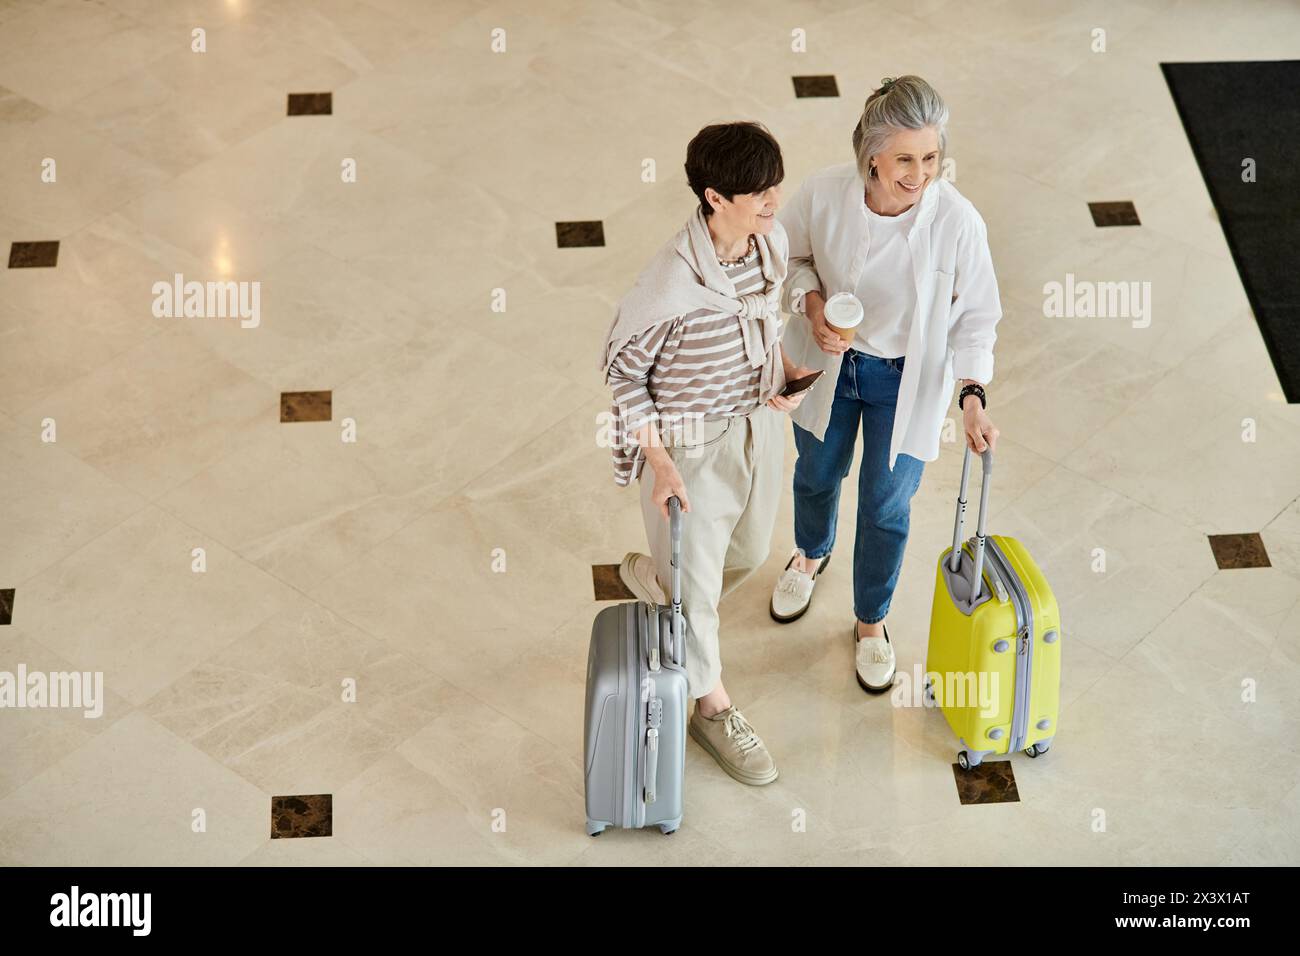 Senior lesbian couple standing with luggage, ready for their journey. Stock Photo